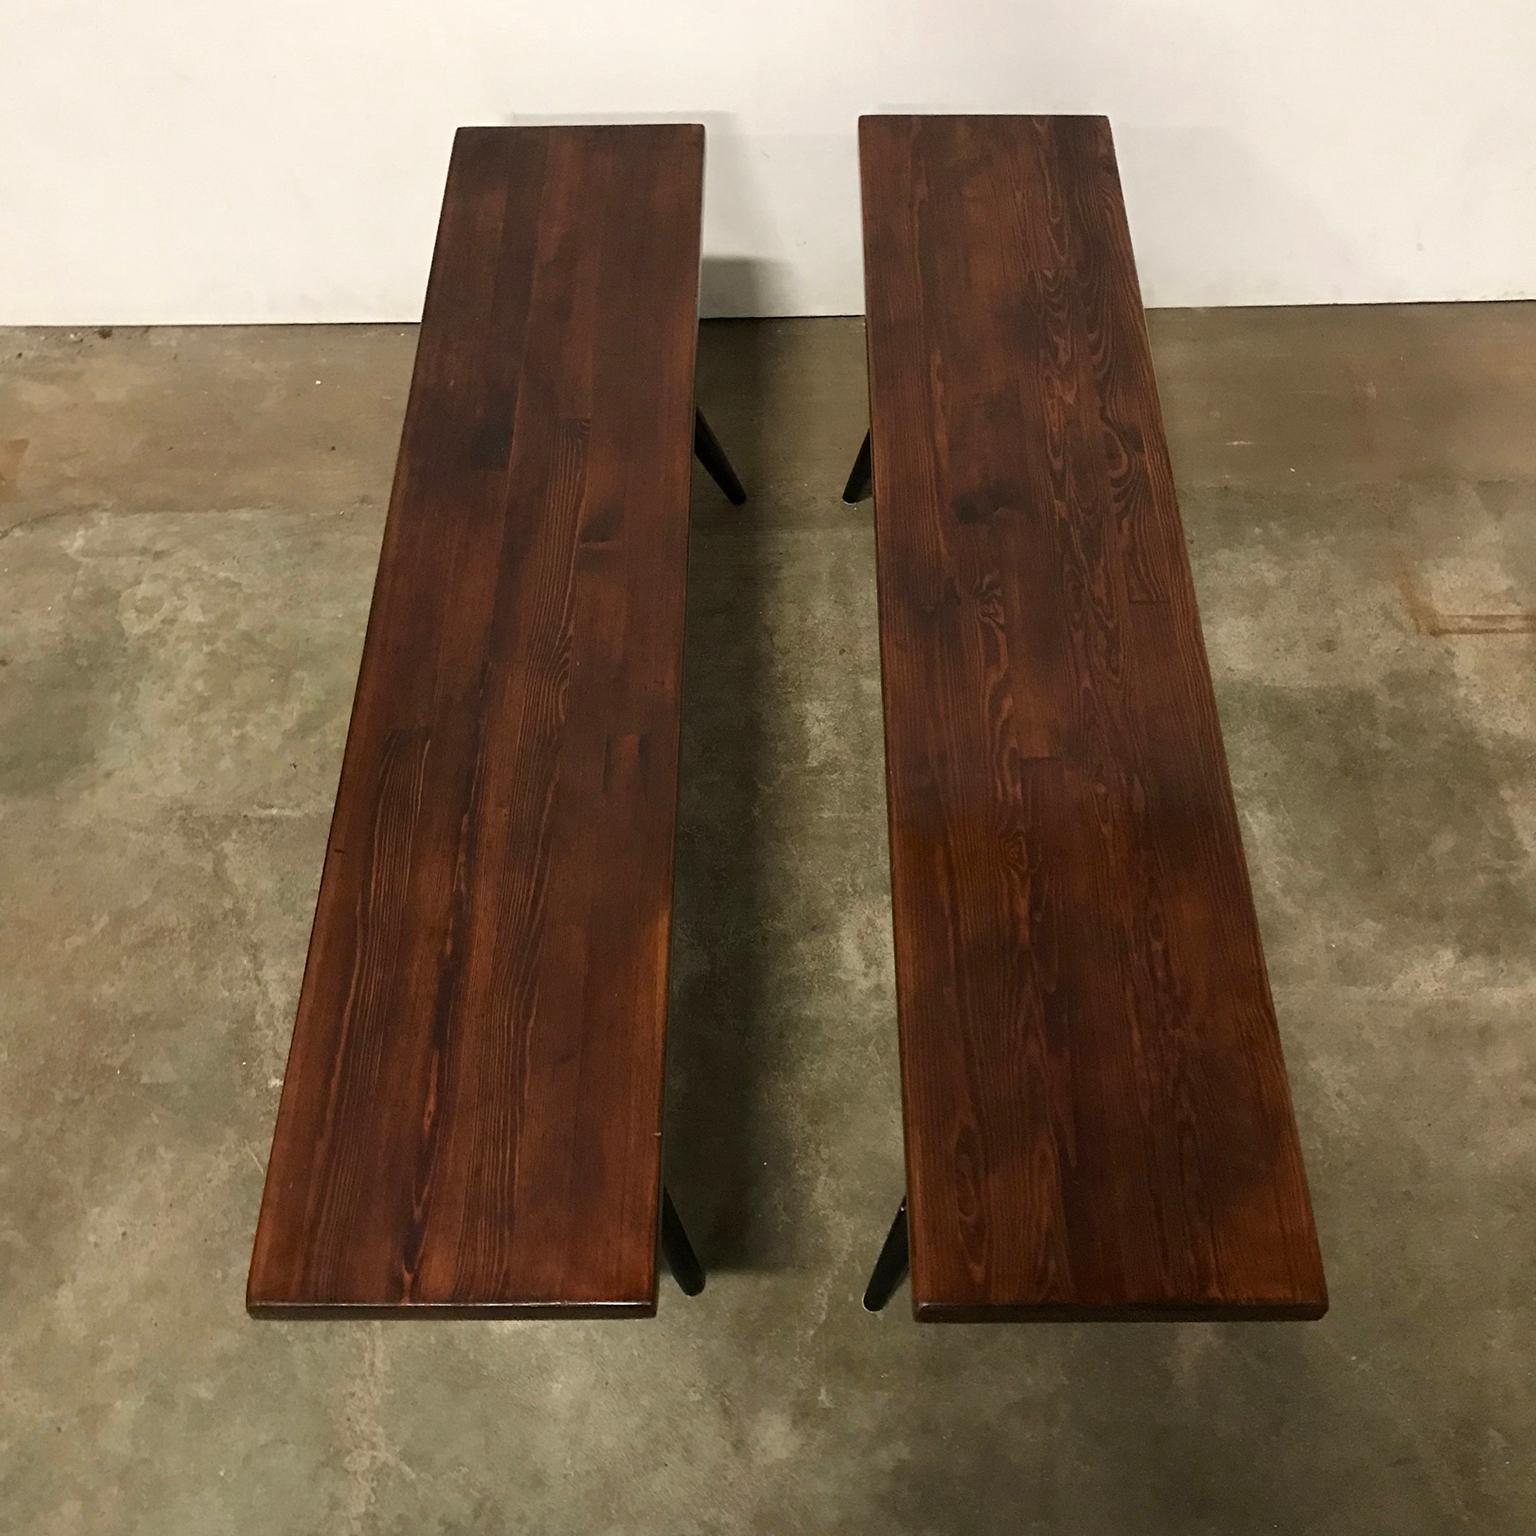 1955, Tapiovaara, Two Pretty Rare Pirkka Benches; Red Brown Wooden Top 2